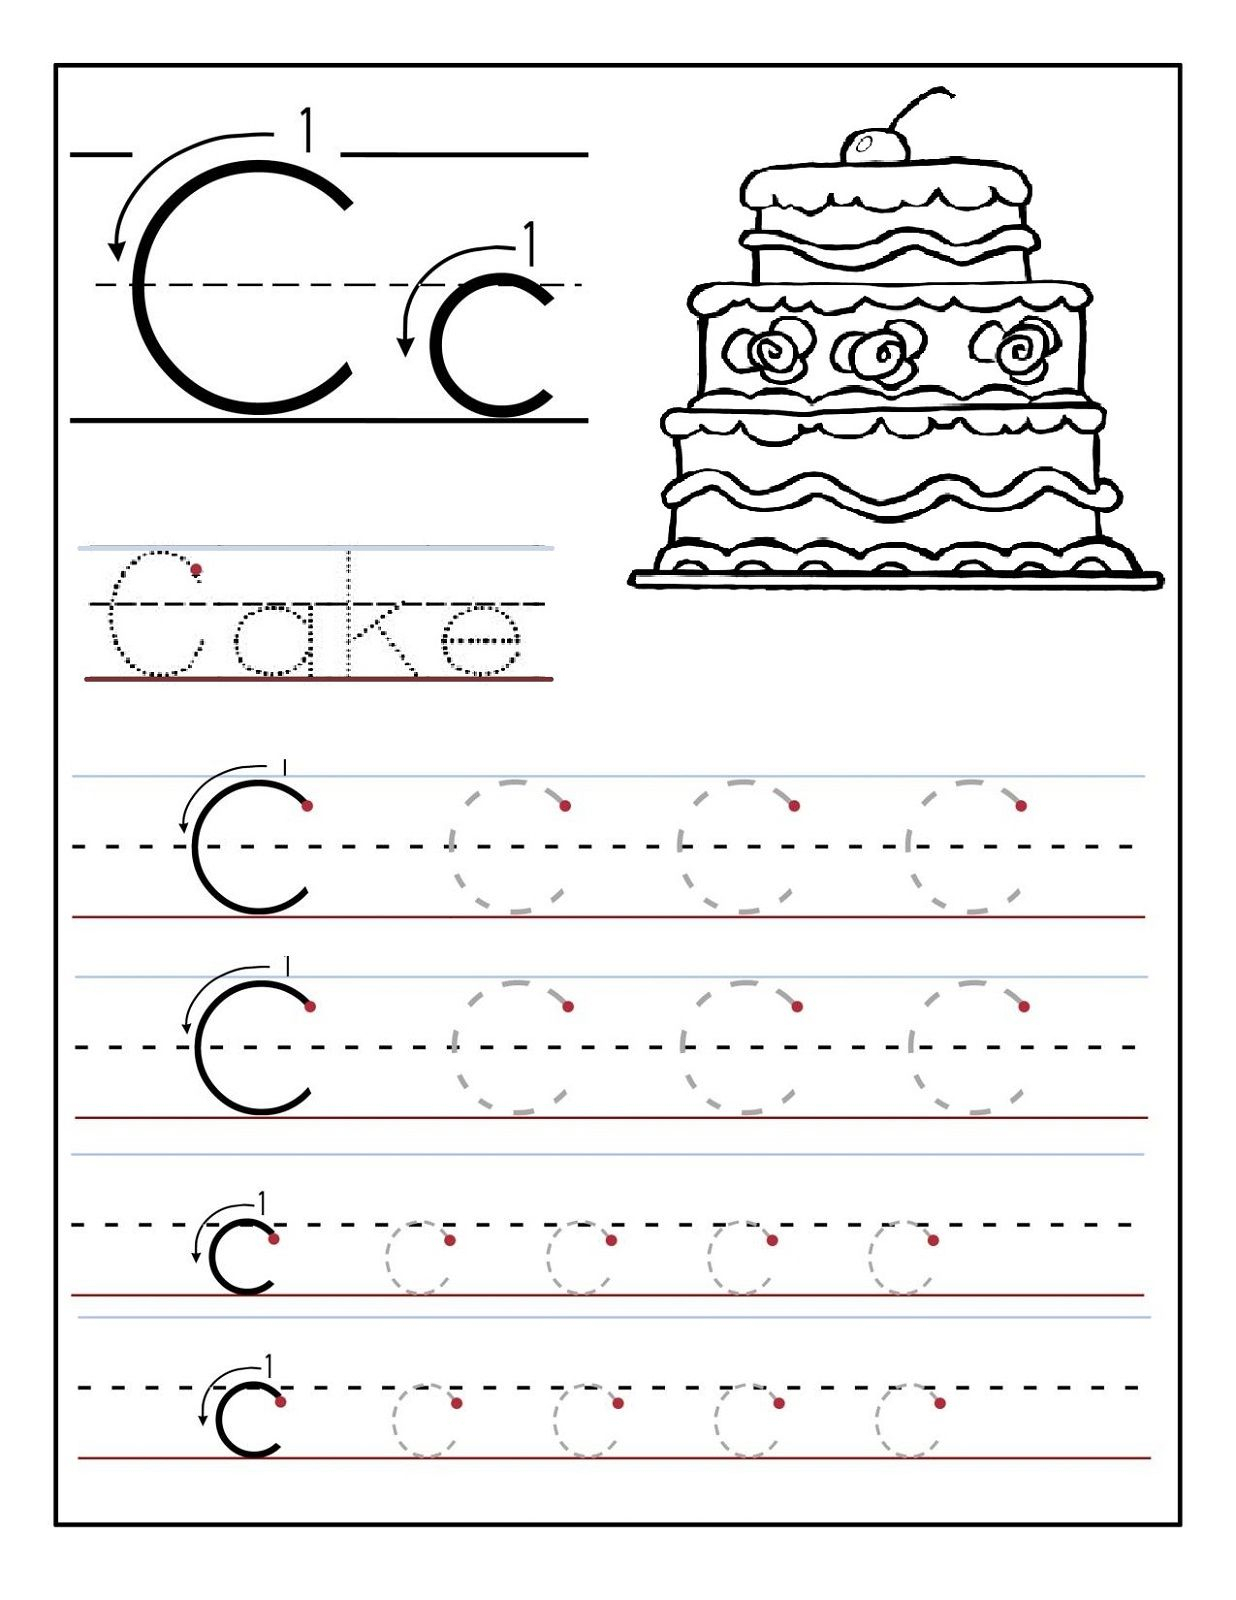 Trace The Letter C Worksheets | Preschool Letters, Letter inside C Letter Worksheets